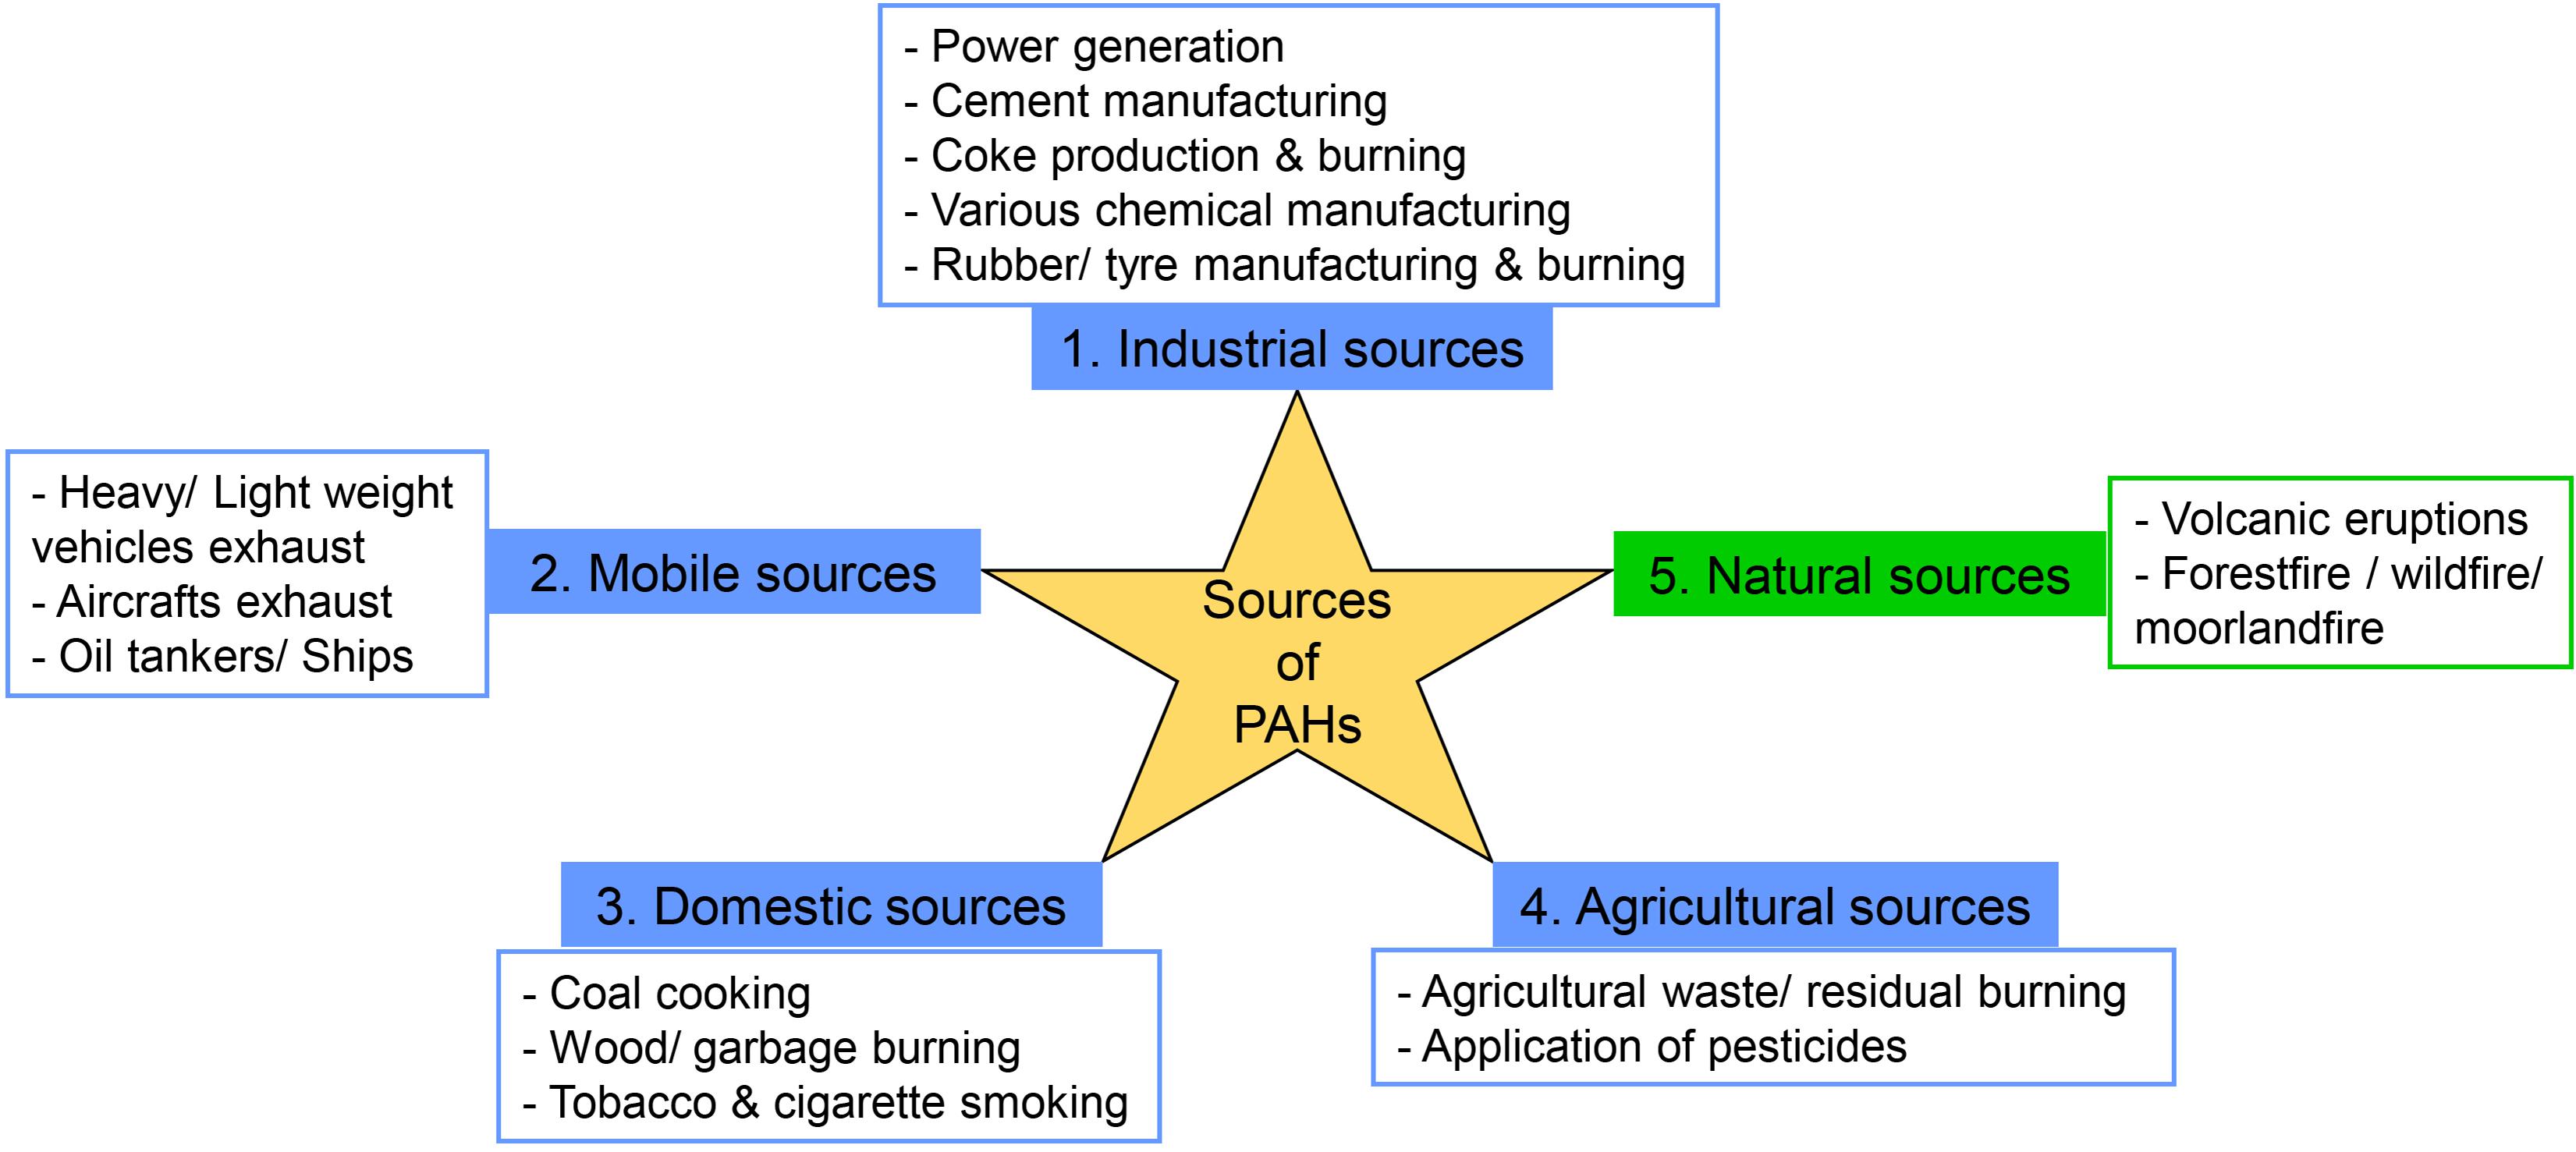 | Polycyclic Aromatic Hydrocarbons: Sources, Toxicity, and Remediation Approaches |